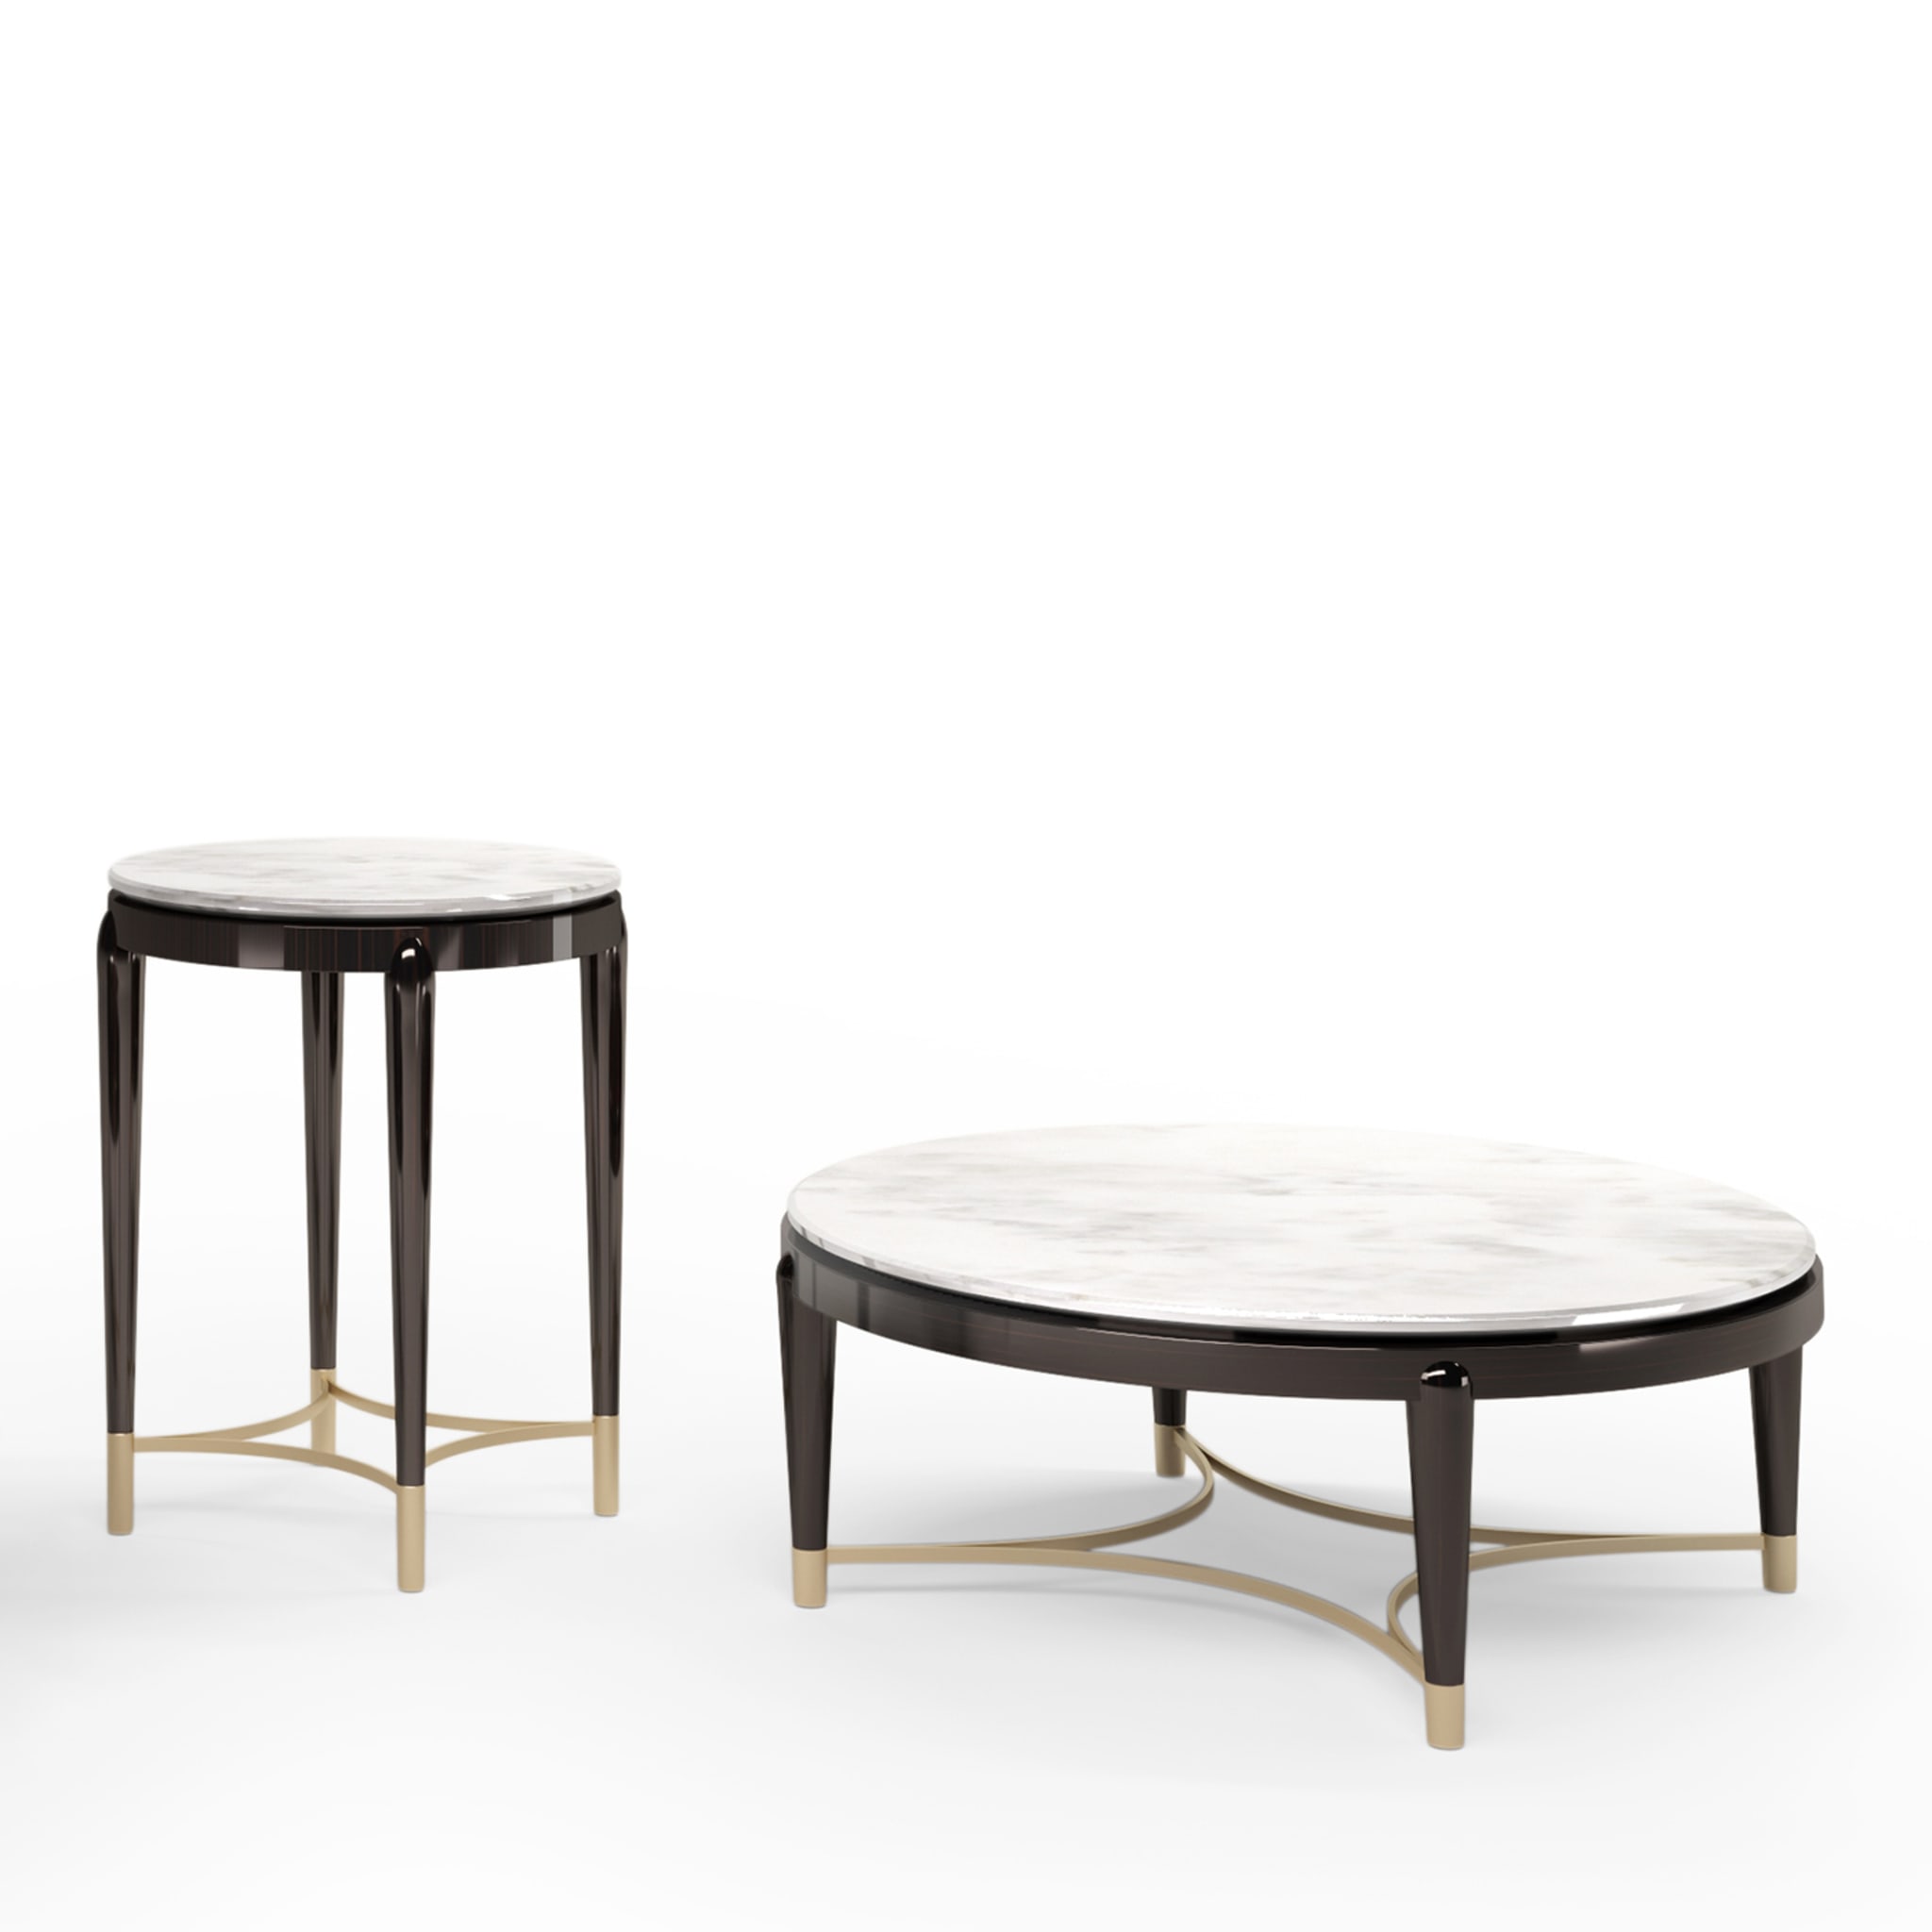 Oscar Marble Top Low Coffee Table - Alternative view 1